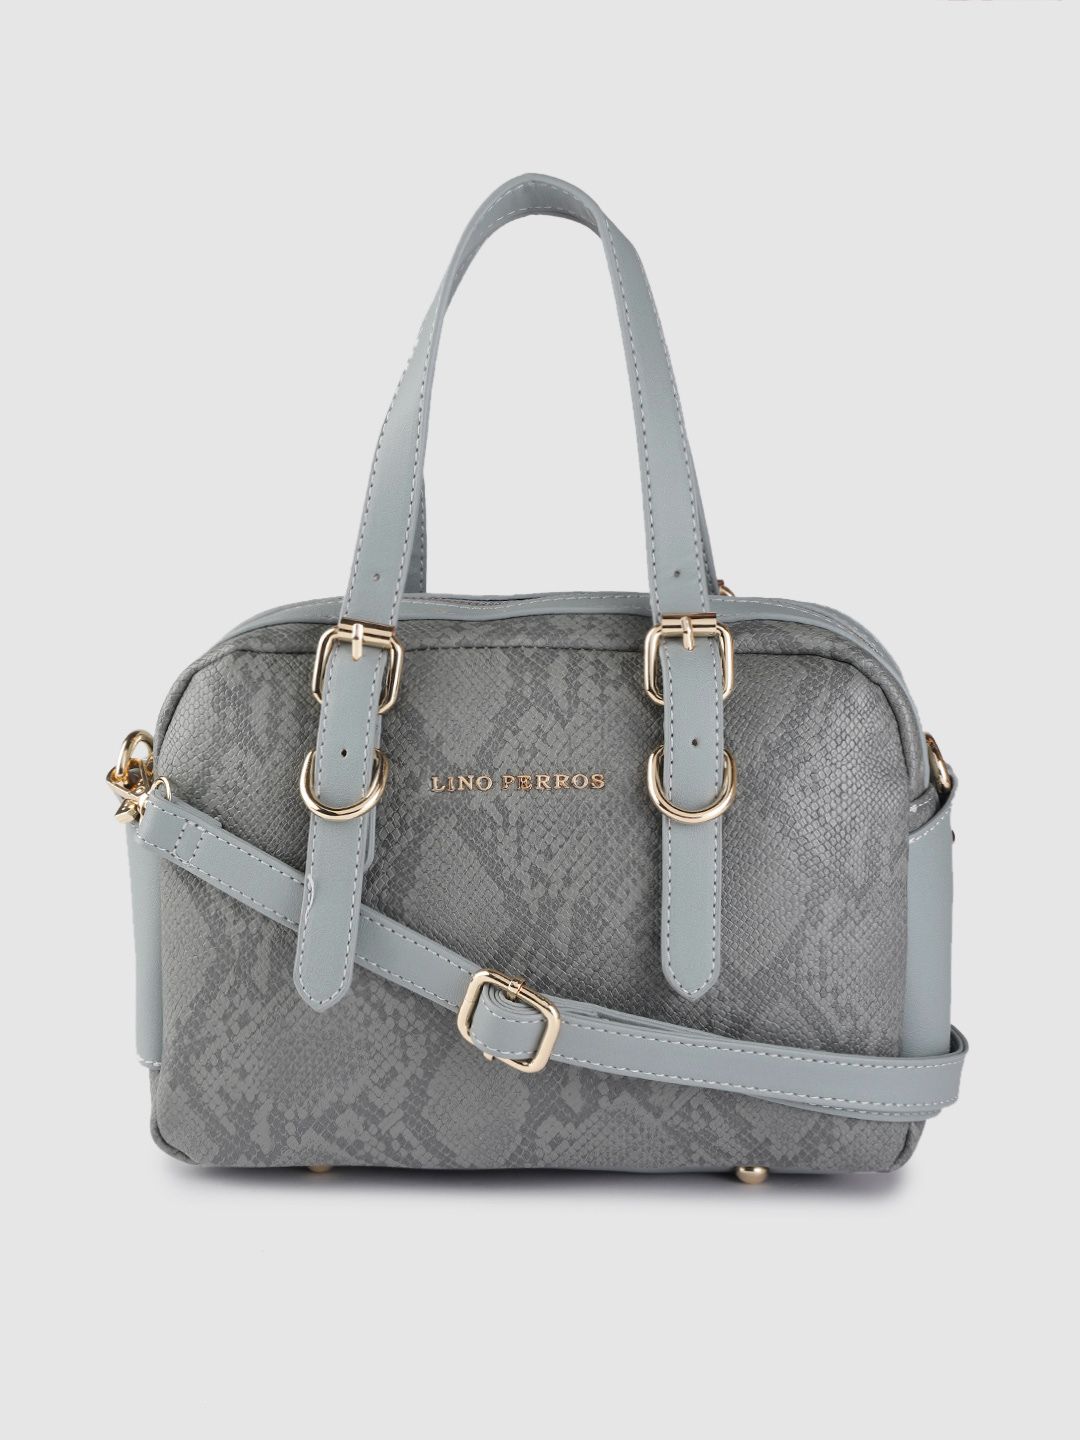 Lino Perros Grey & Blue Snakeskin Textured Handheld Bag with Detachable Sling Strap Price in India